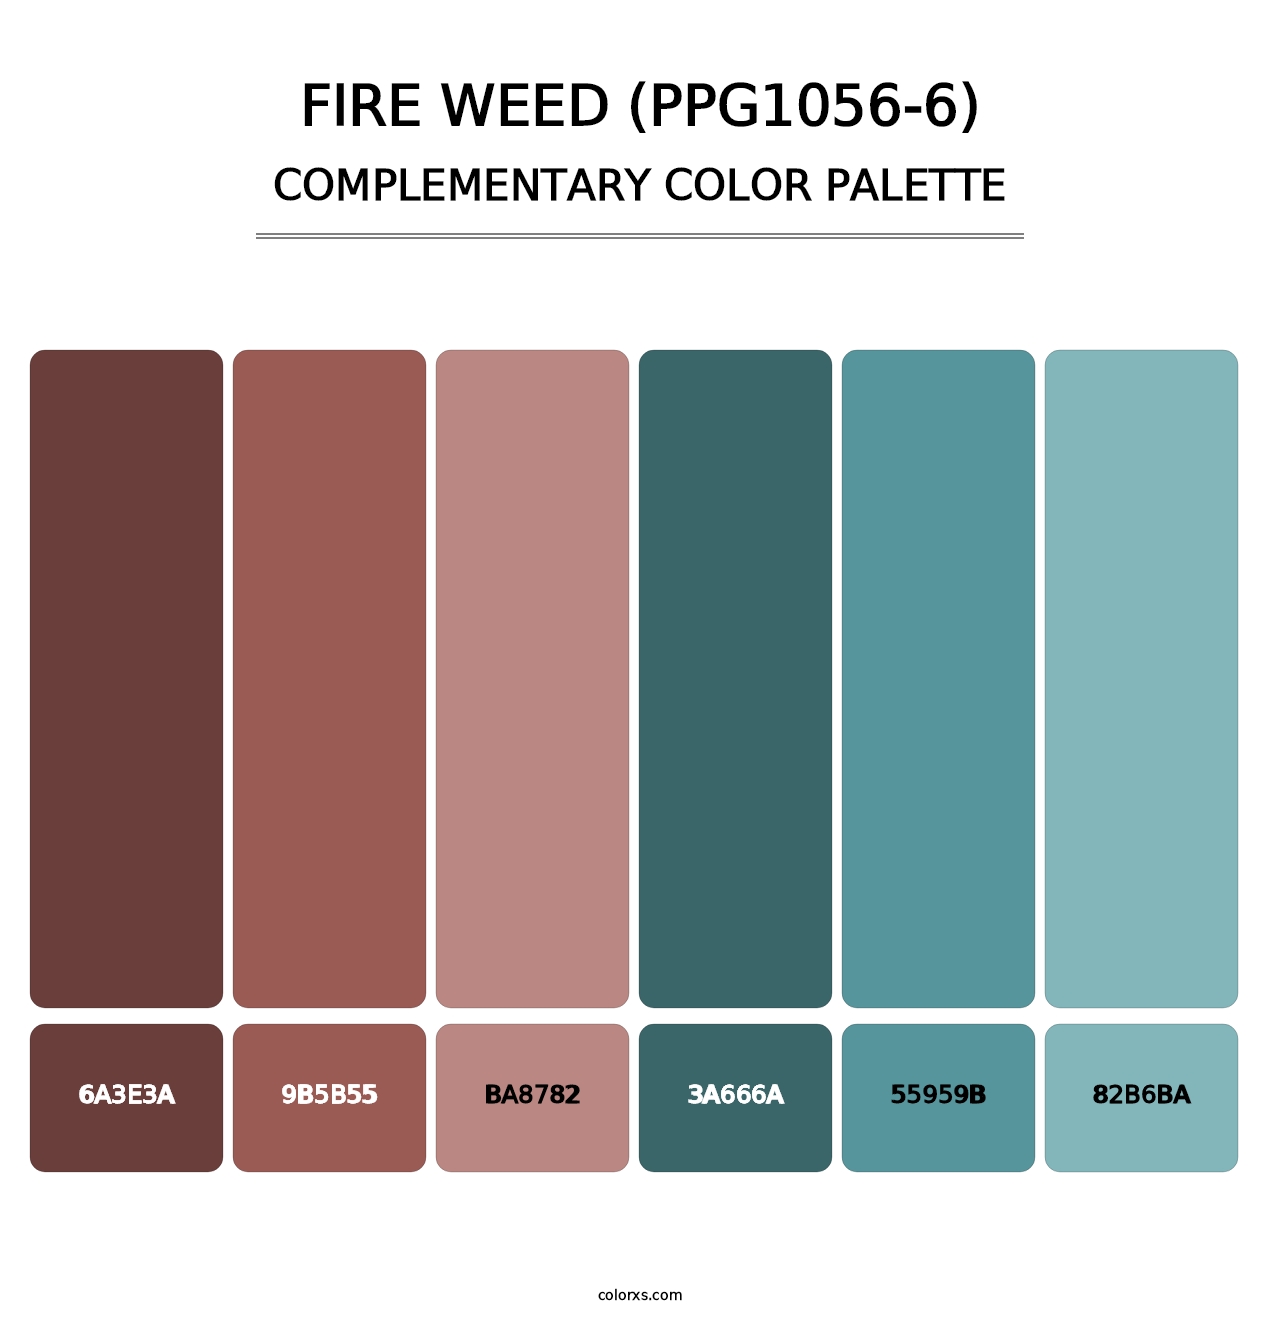 Fire Weed (PPG1056-6) - Complementary Color Palette